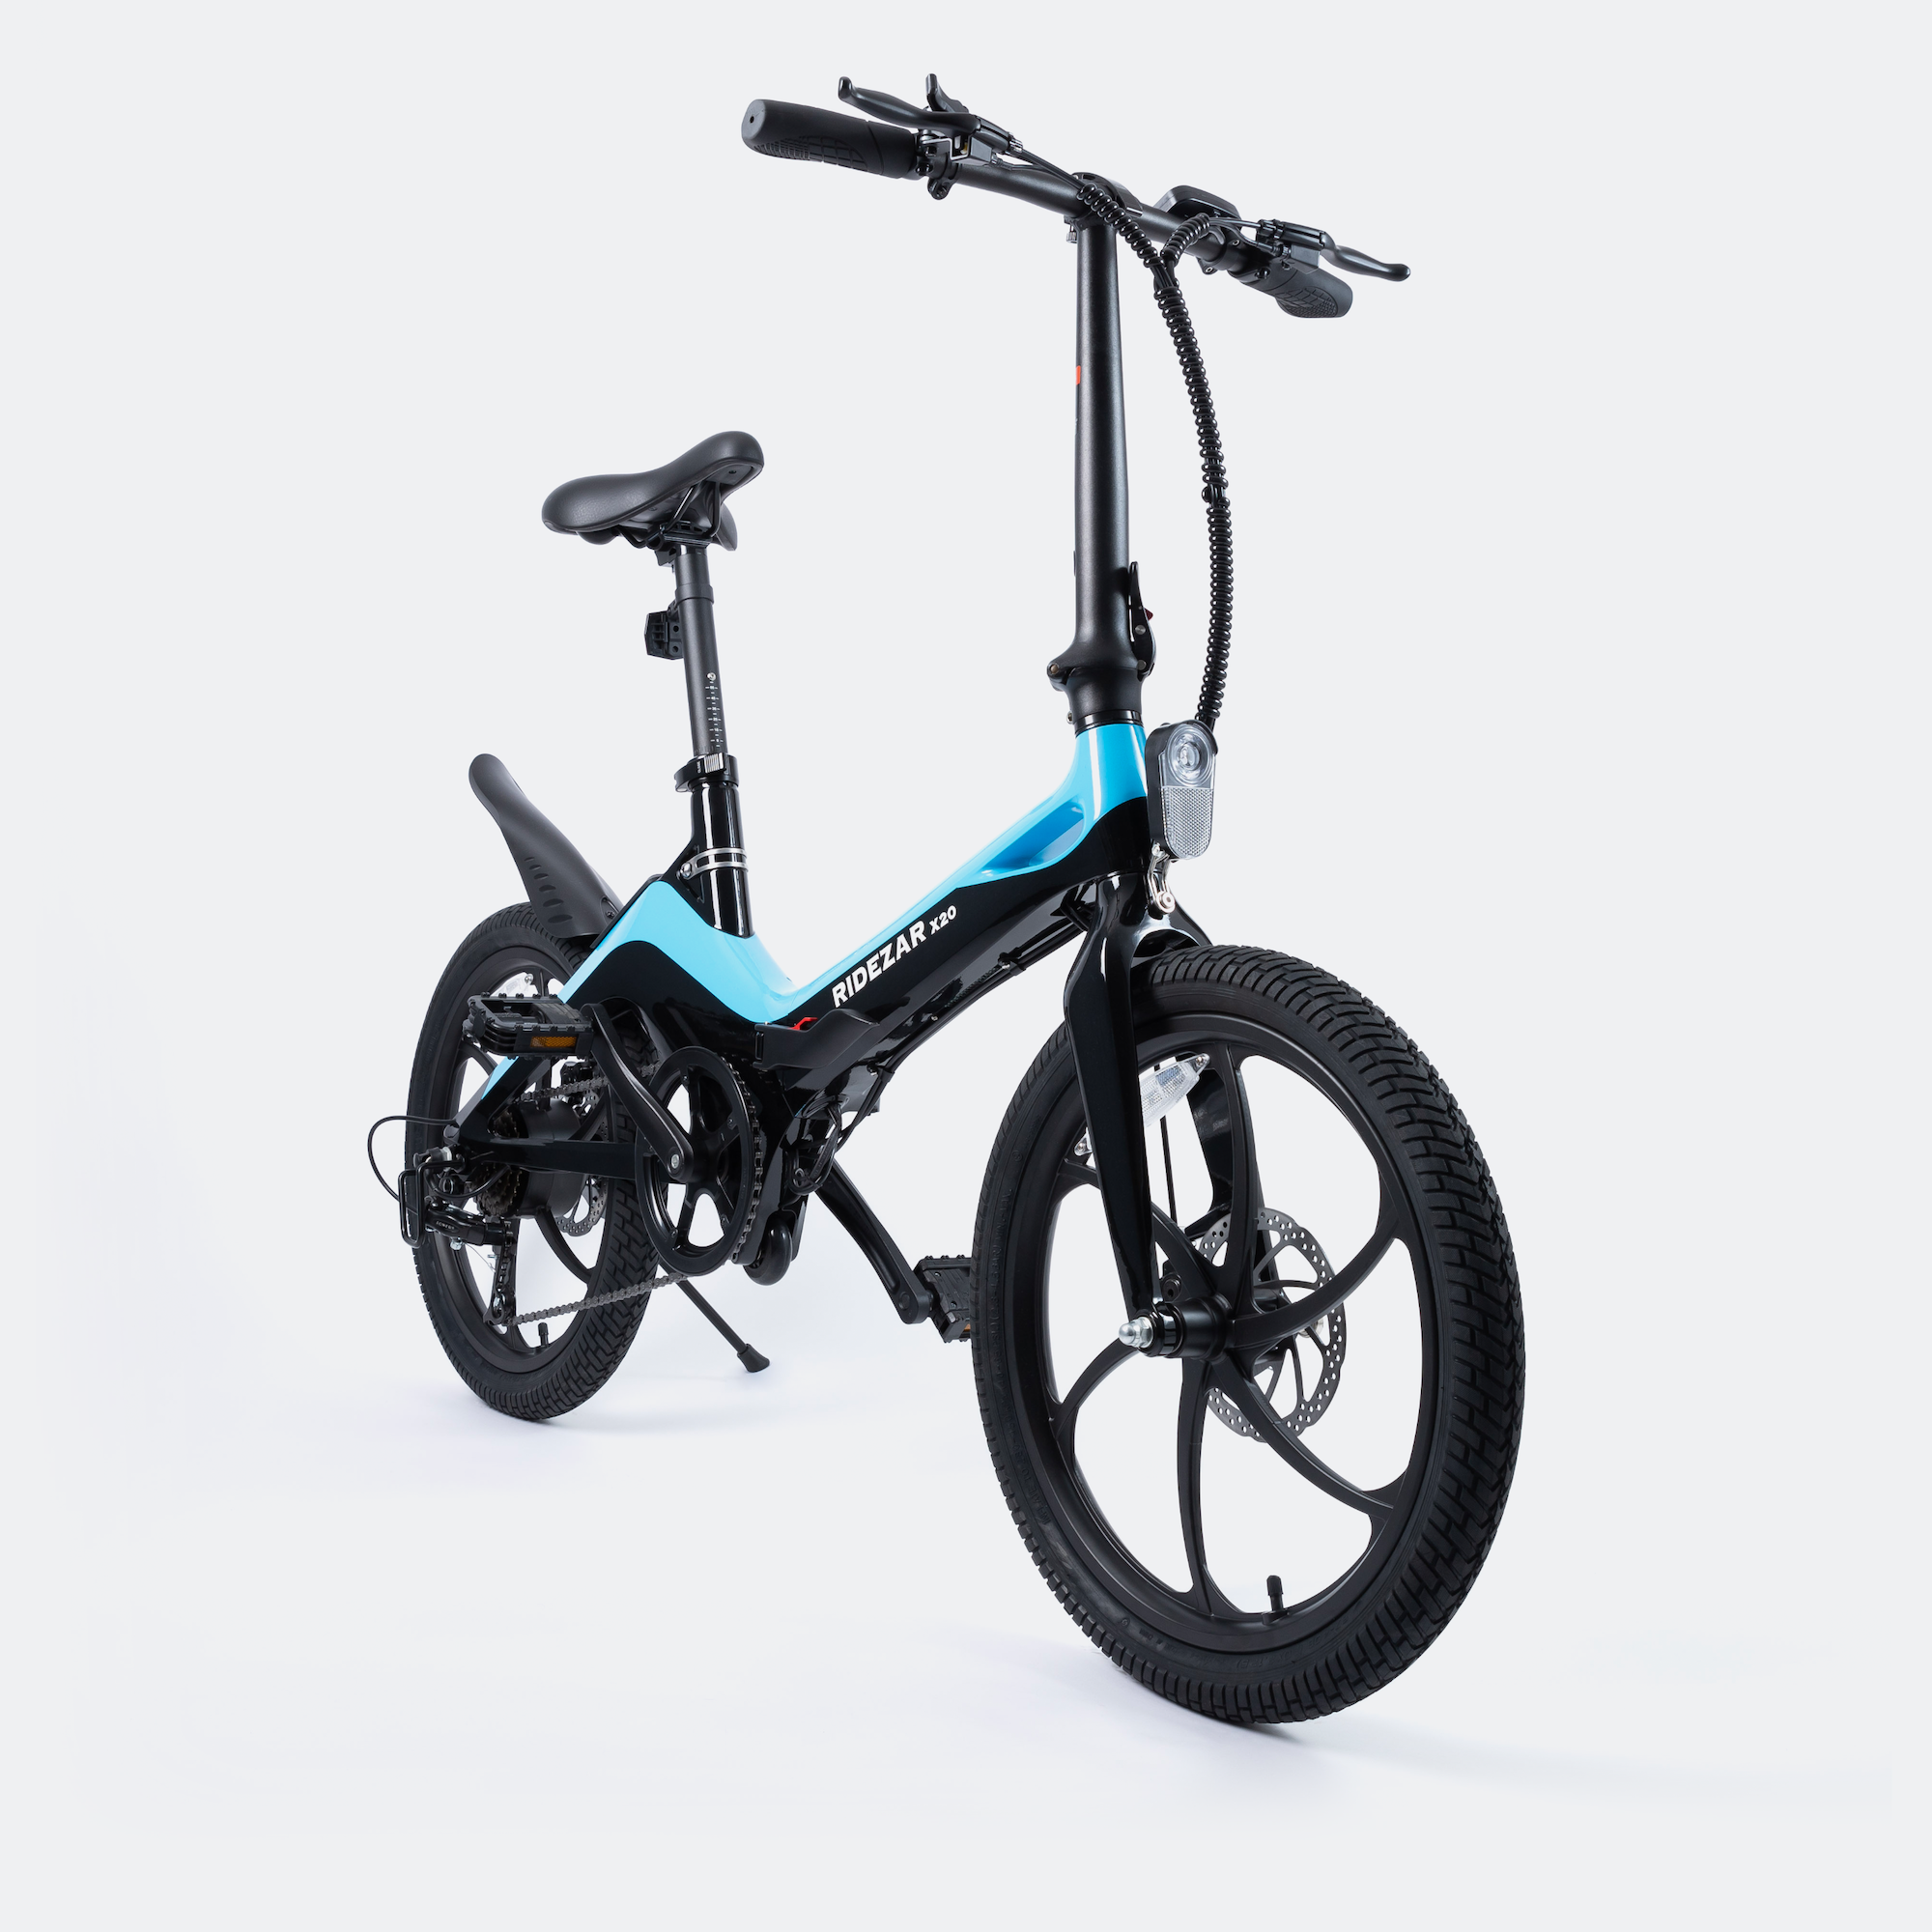 Front view of the 2022 Ridezar Rapid X20 Foldable Electric Bike